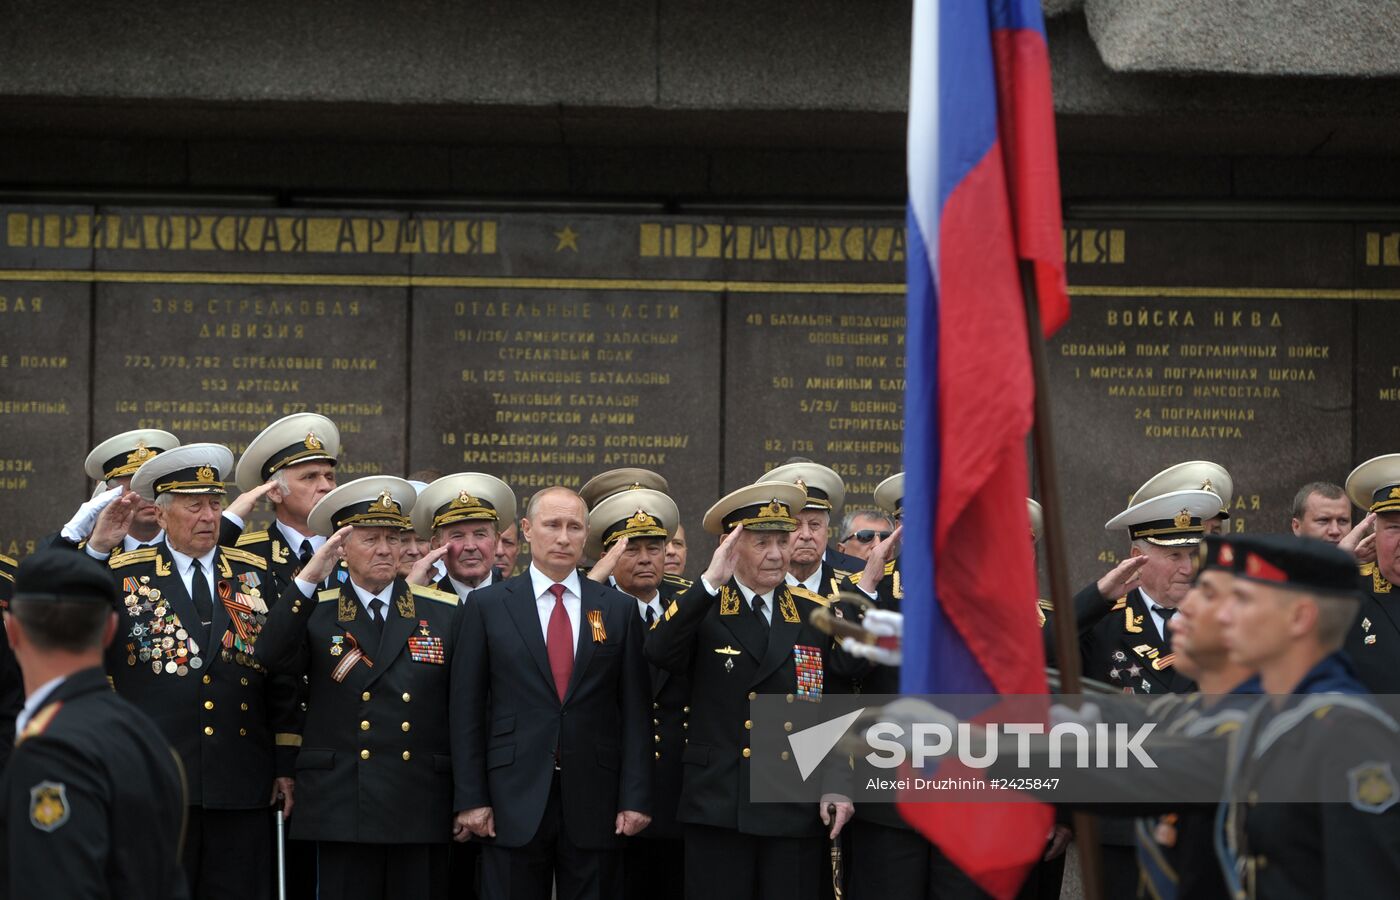 Vladimir Putin attends celebrations marking 69th anniversary of victory in Great Patriotic War and anniversary of Sevastopol's liberation